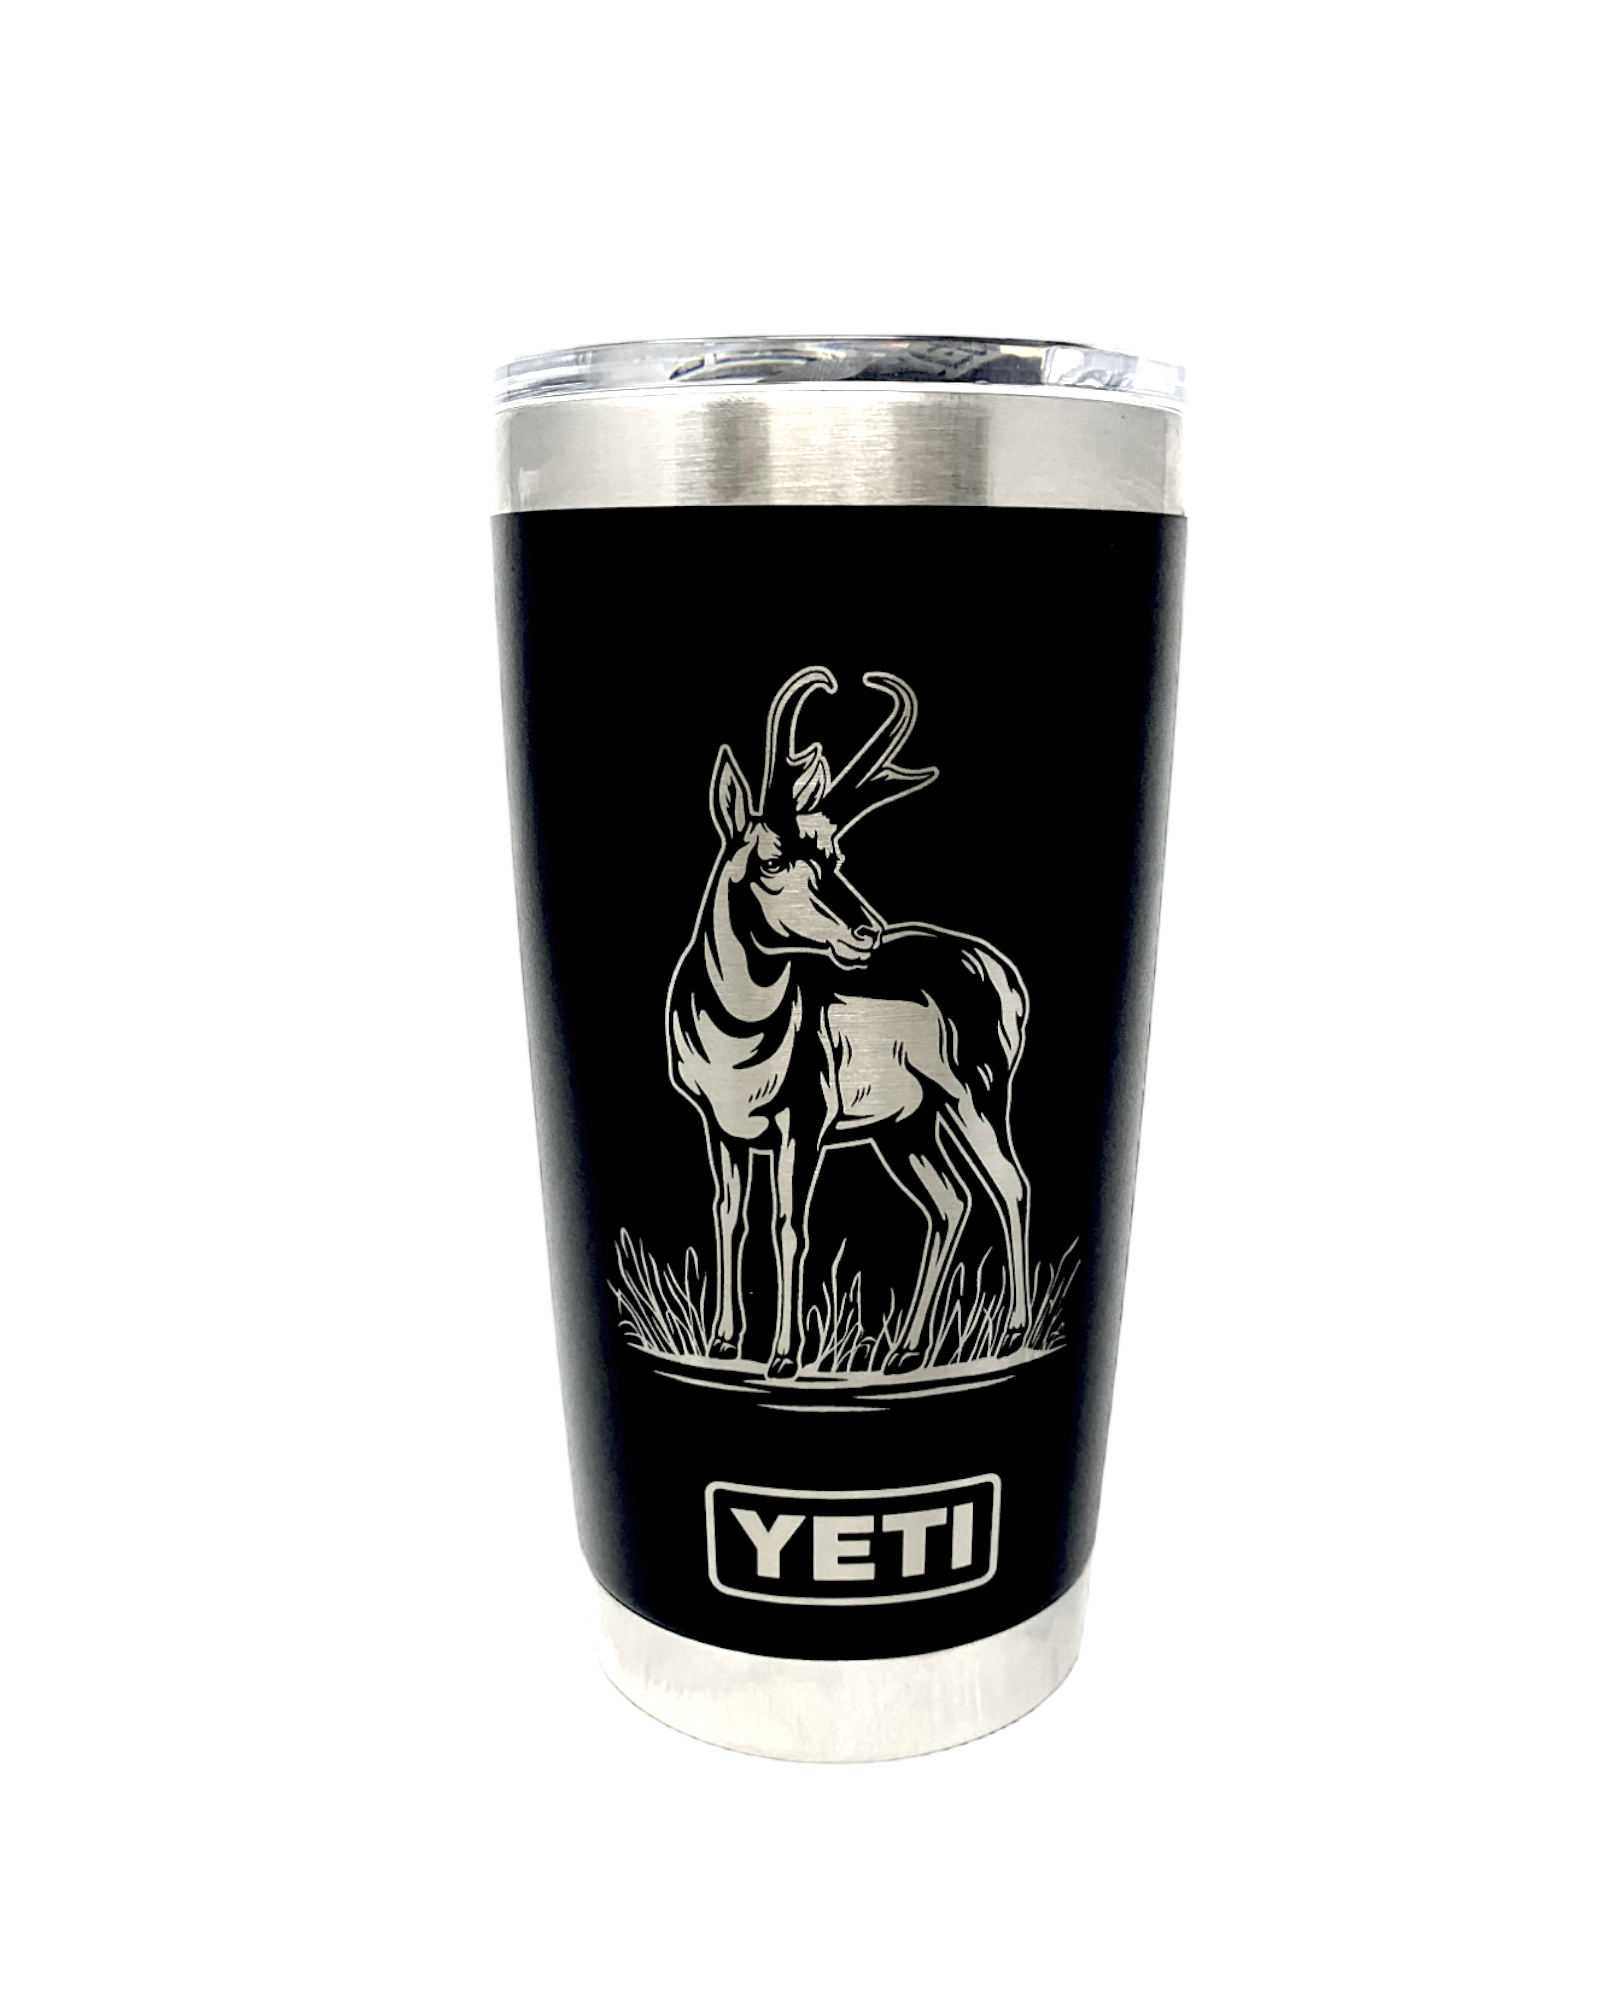 Yeti Releases Over 30 Products in Its Newest Color, Rescue Red